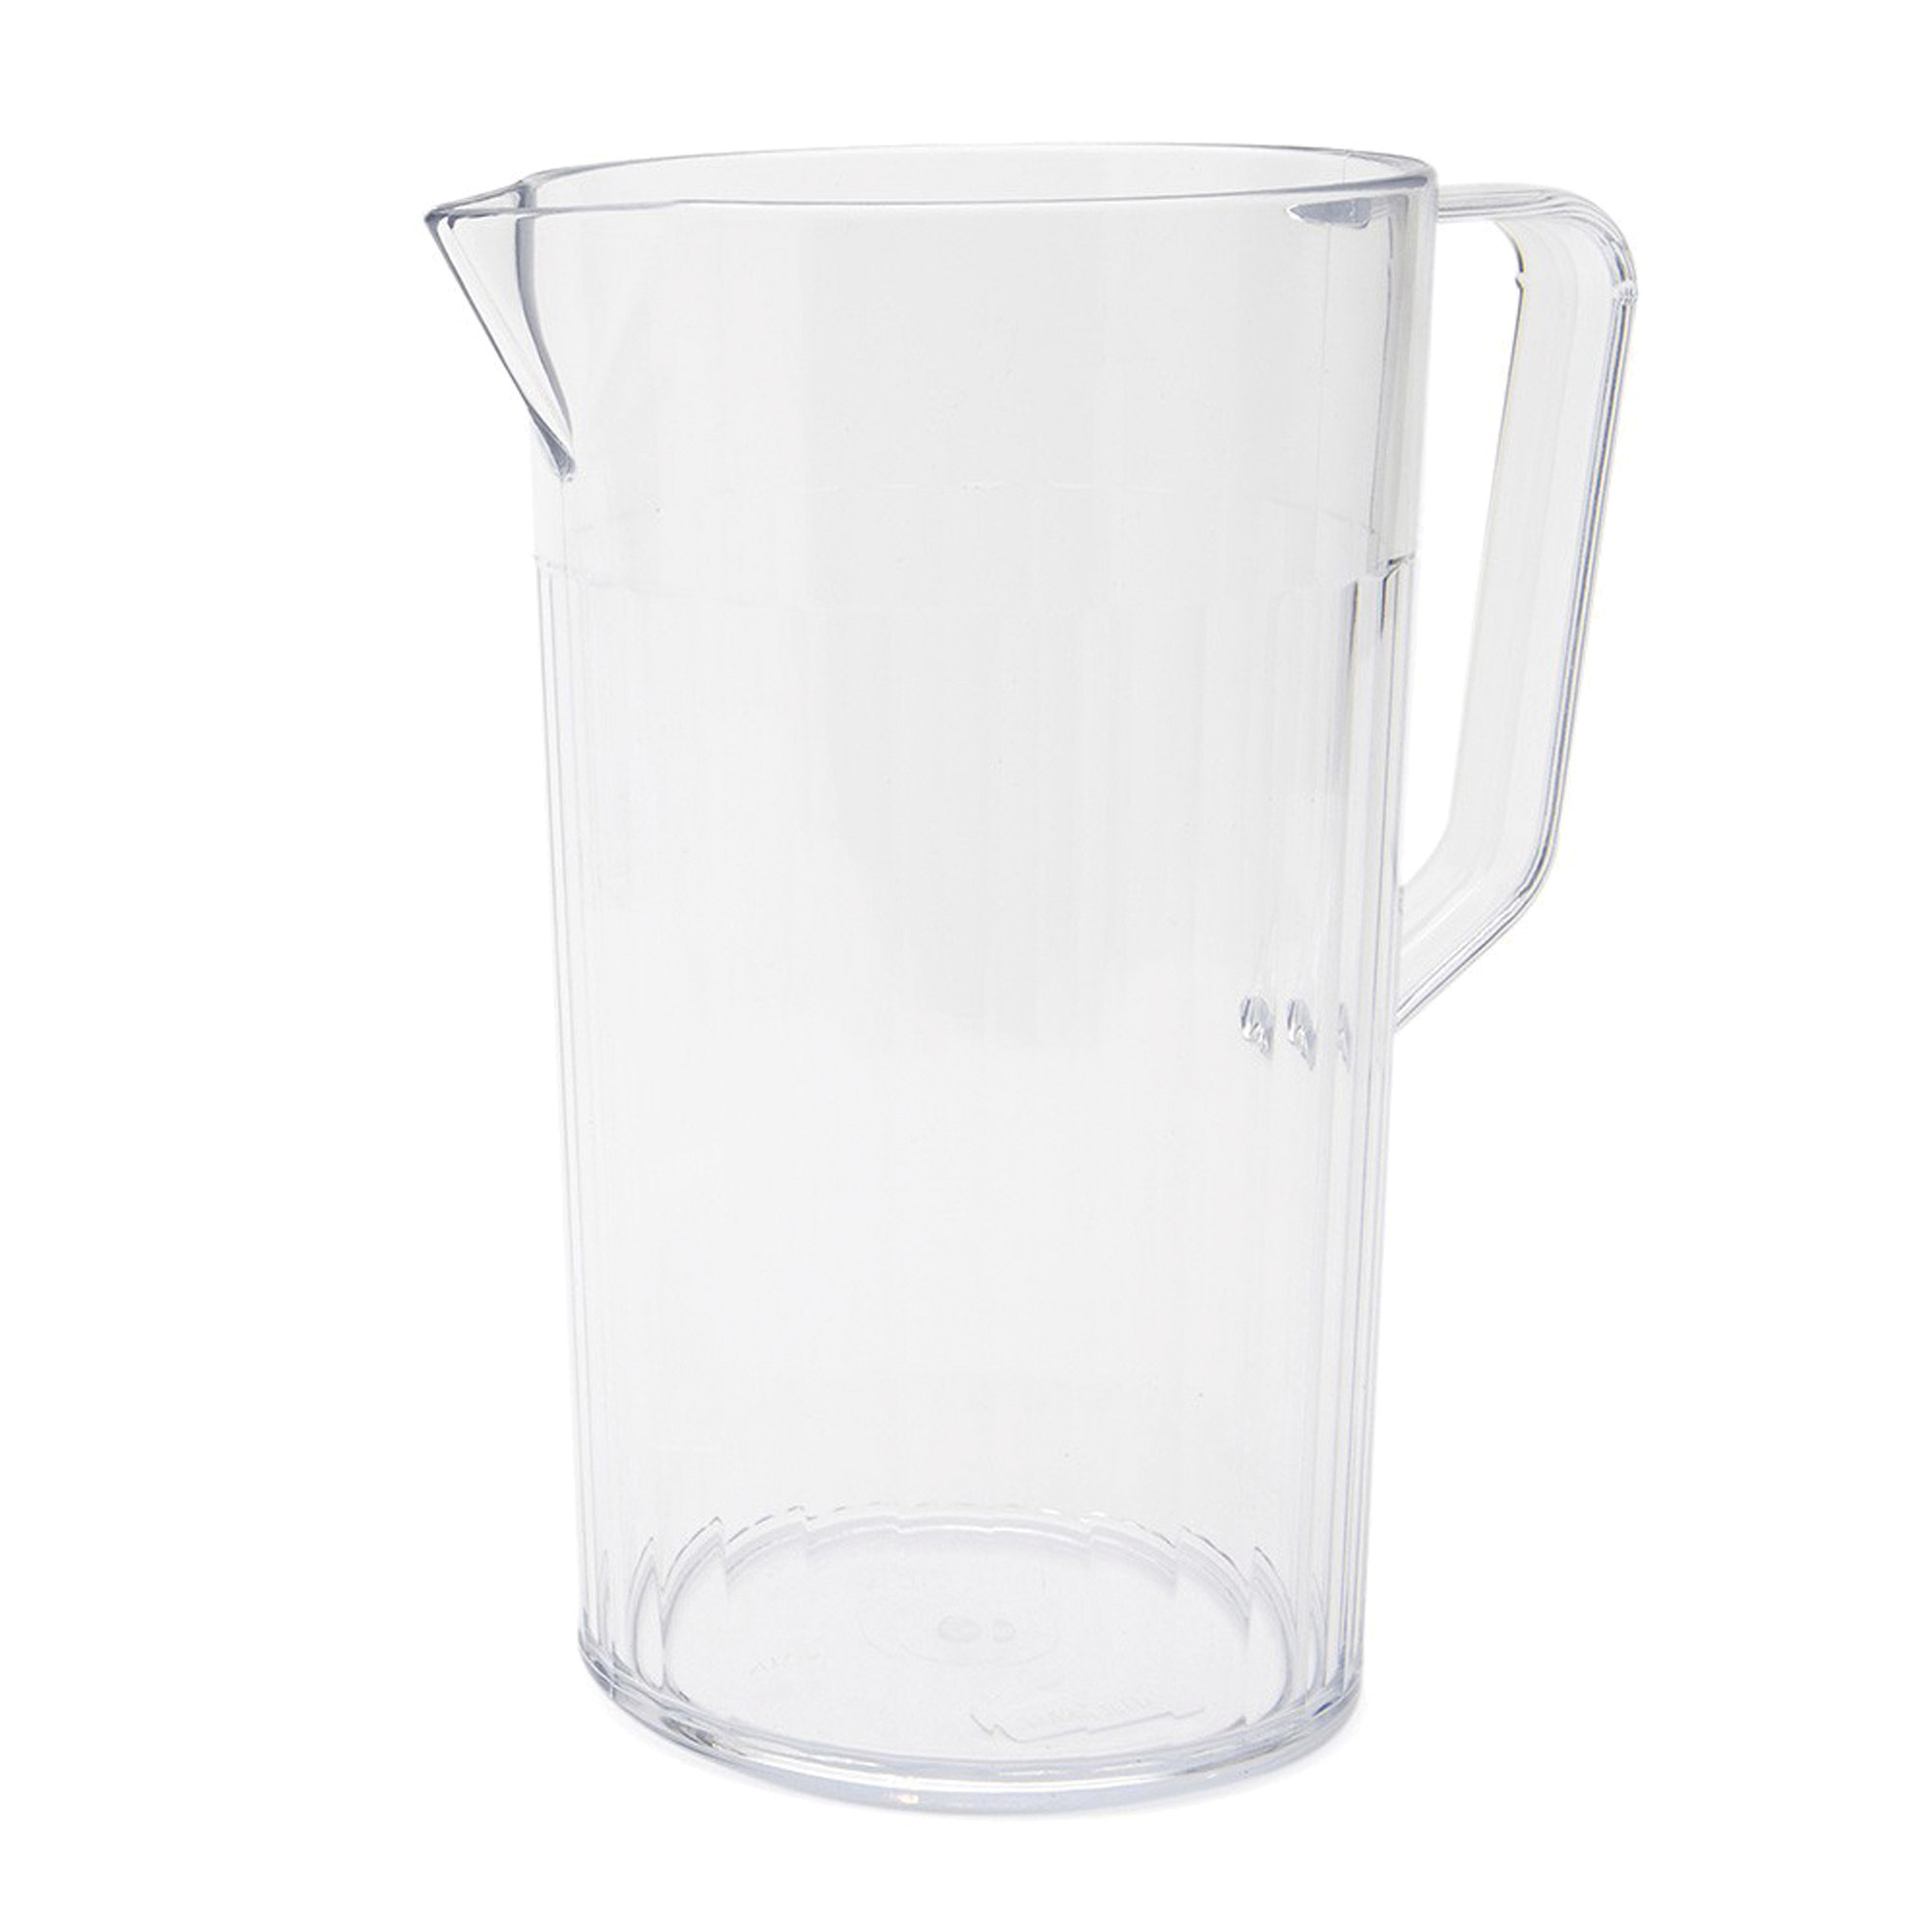 1.1 Litre Polycarbonate Jug CLEAR (microwave and dishwasher safe) - Each